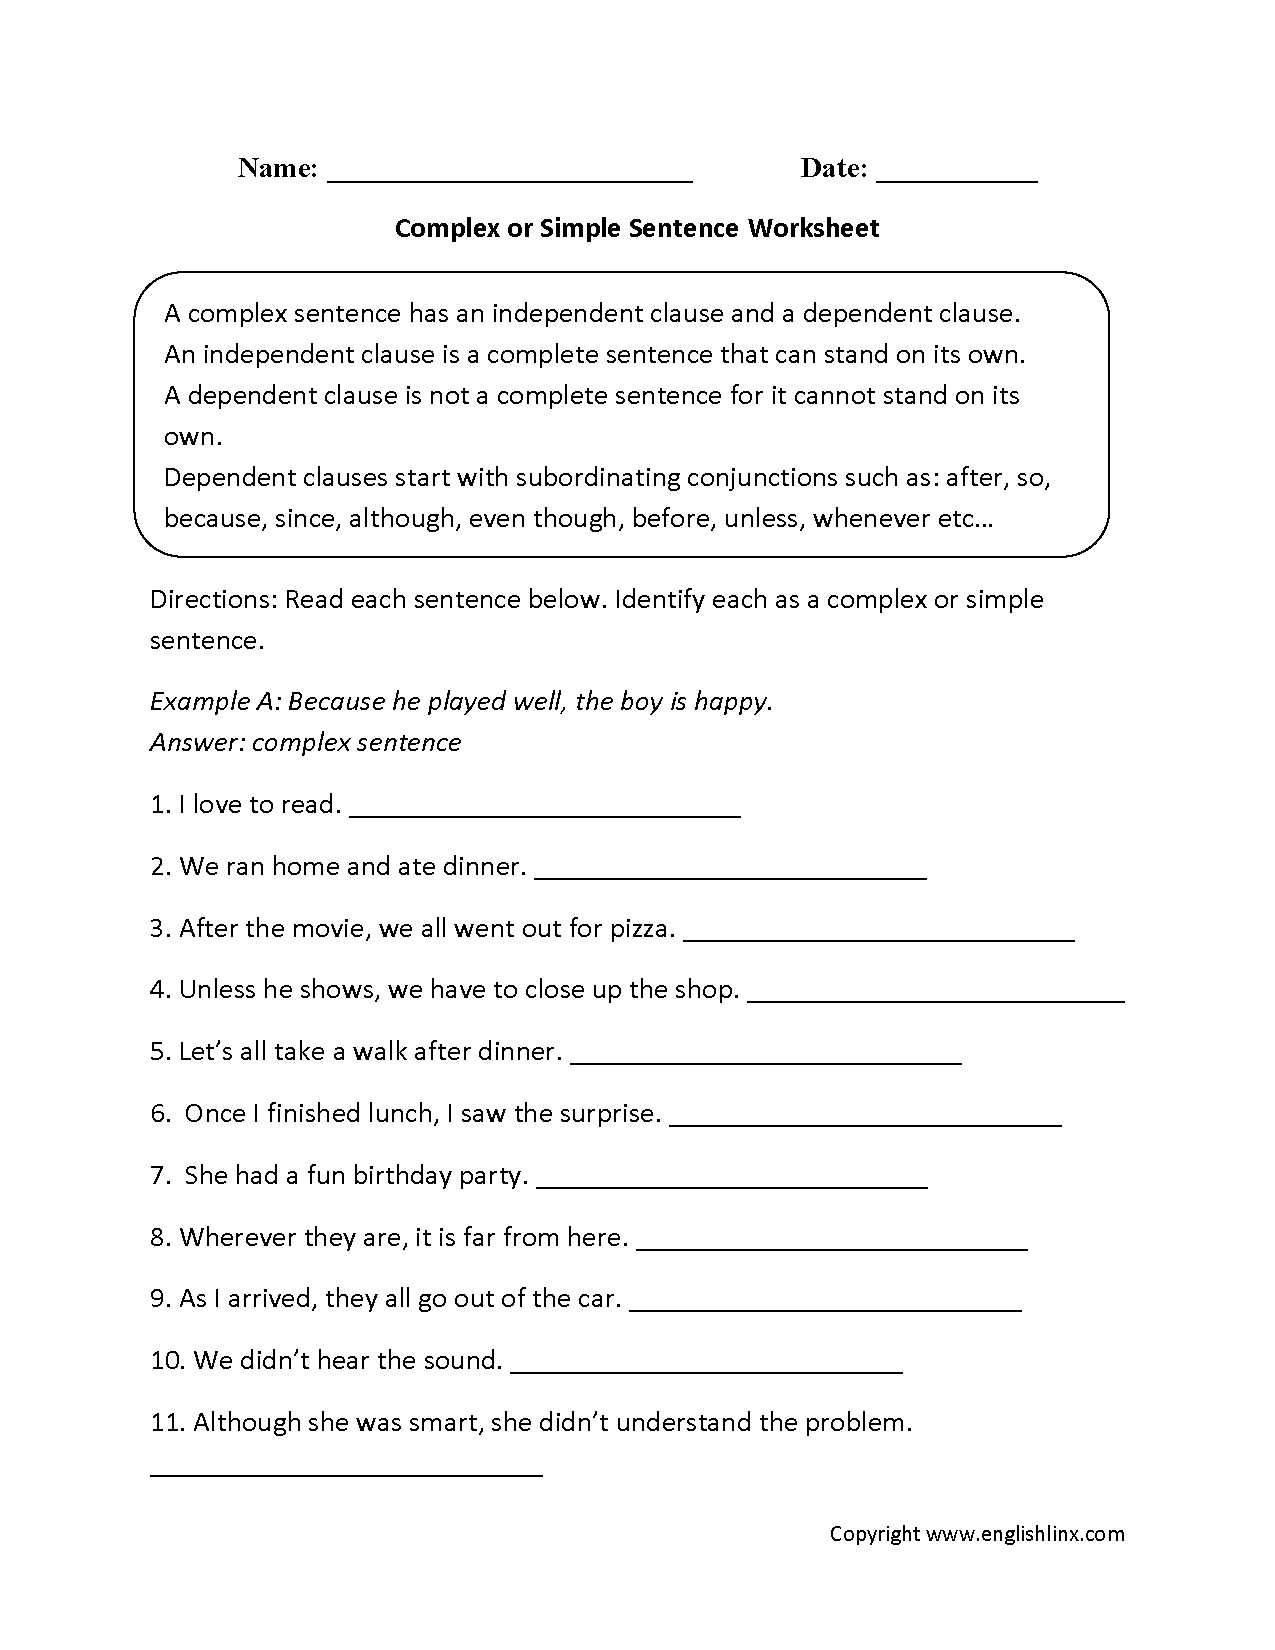 Sentences Worksheets  Complex Sentences Worksheets As Well As Simple Compound And Complex Sentences Worksheet Pdf With Answers